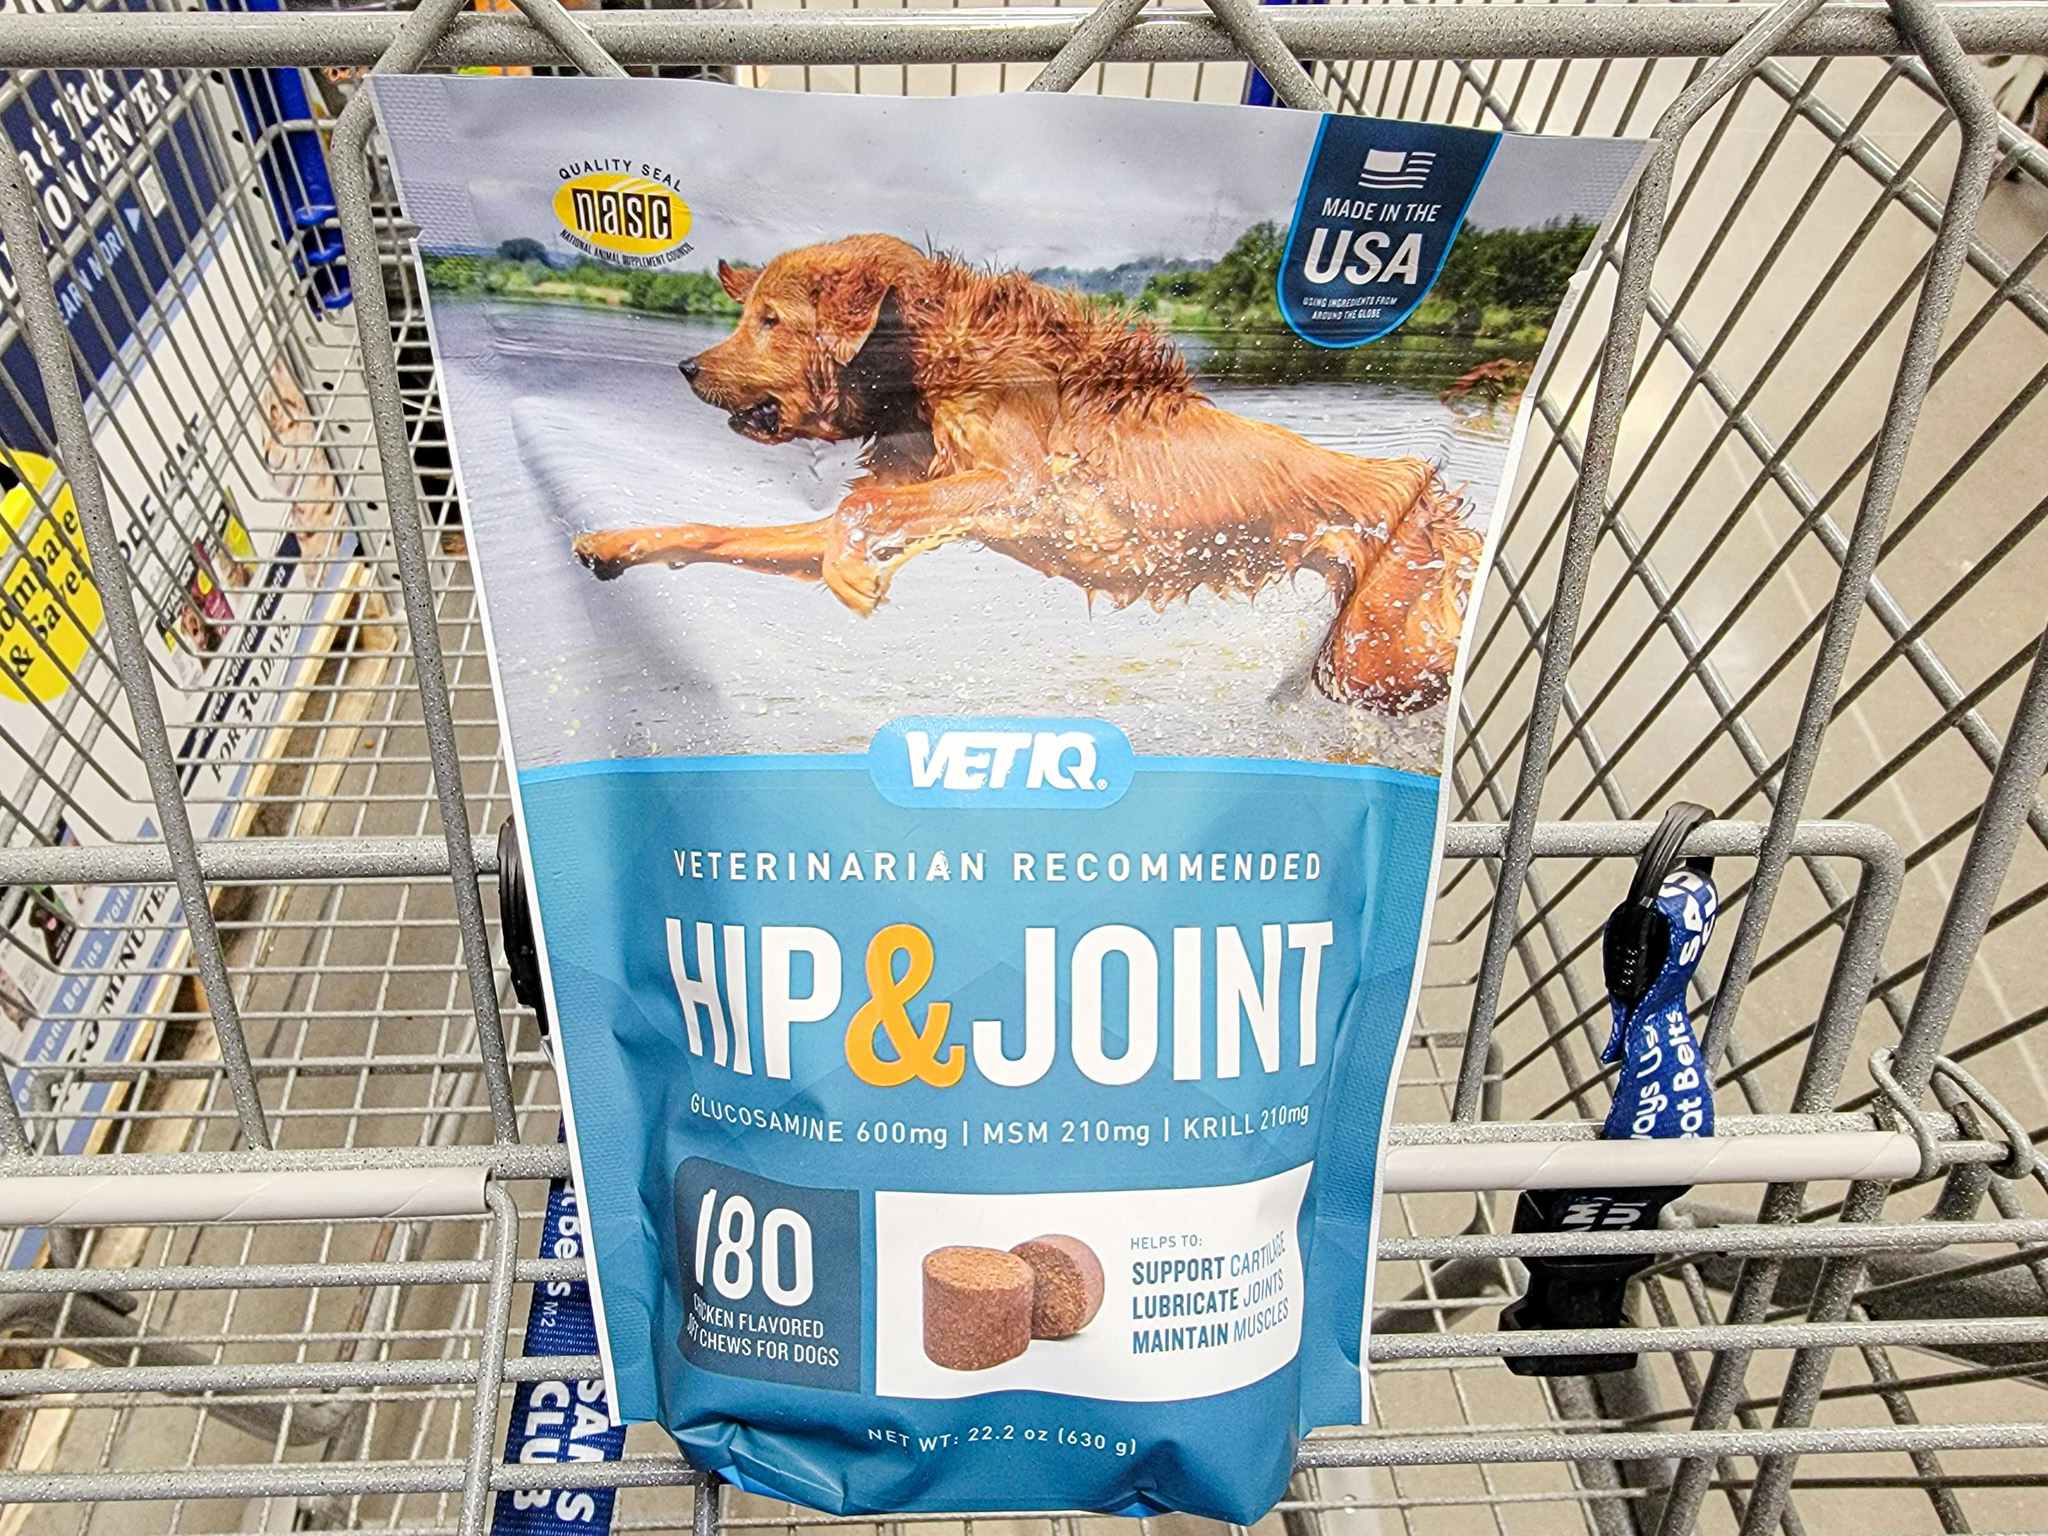 VetIQ Hip and Joint Supplements 180-Pack, Now $15.63 on Amazon